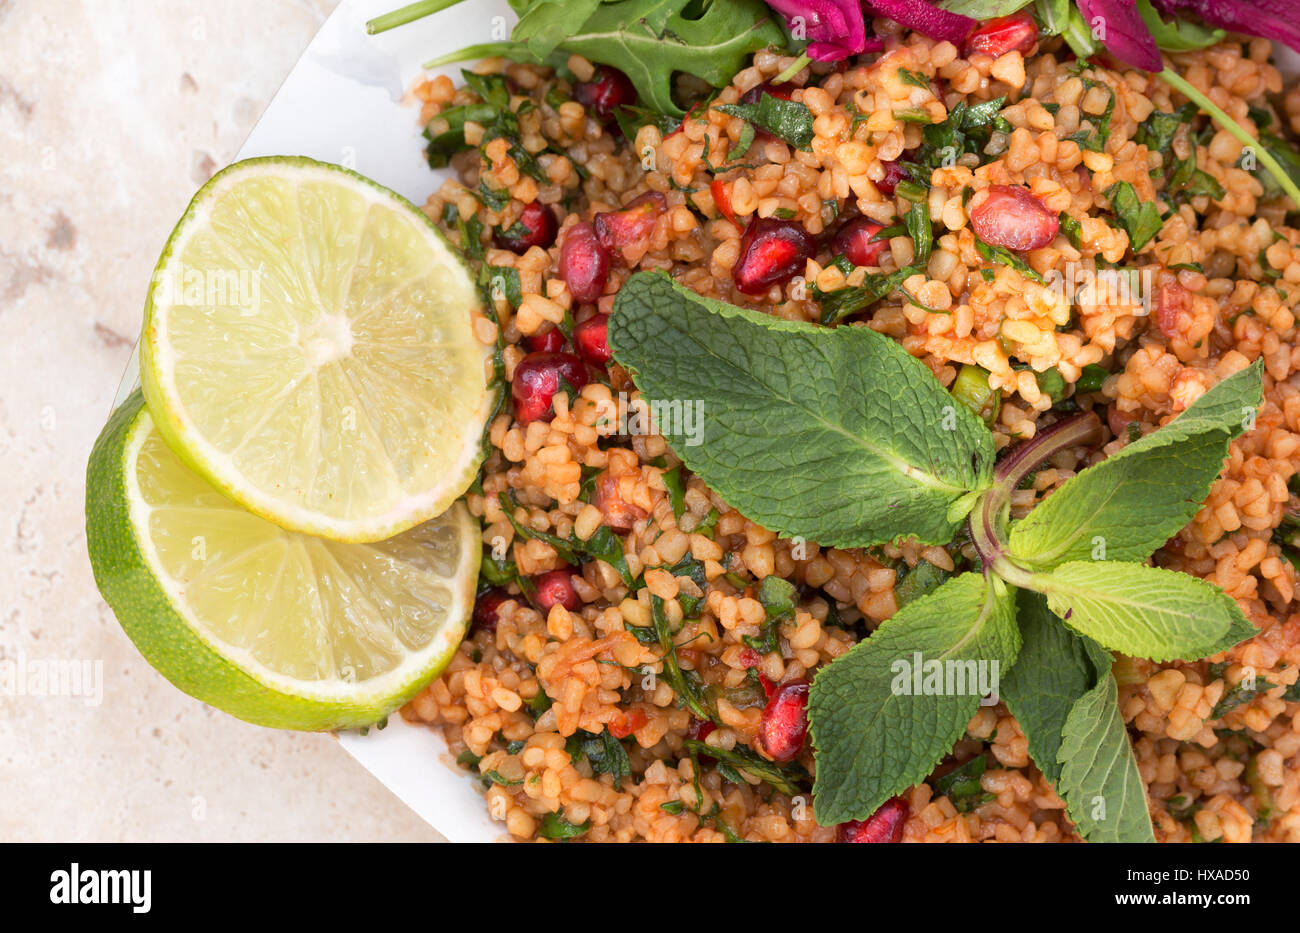 Vegetarian food - Middle eastern food consisting of Bulgur Wheat salad, rocket, pickled cabbage limes and mint - concept - healthy eating Stock Photo